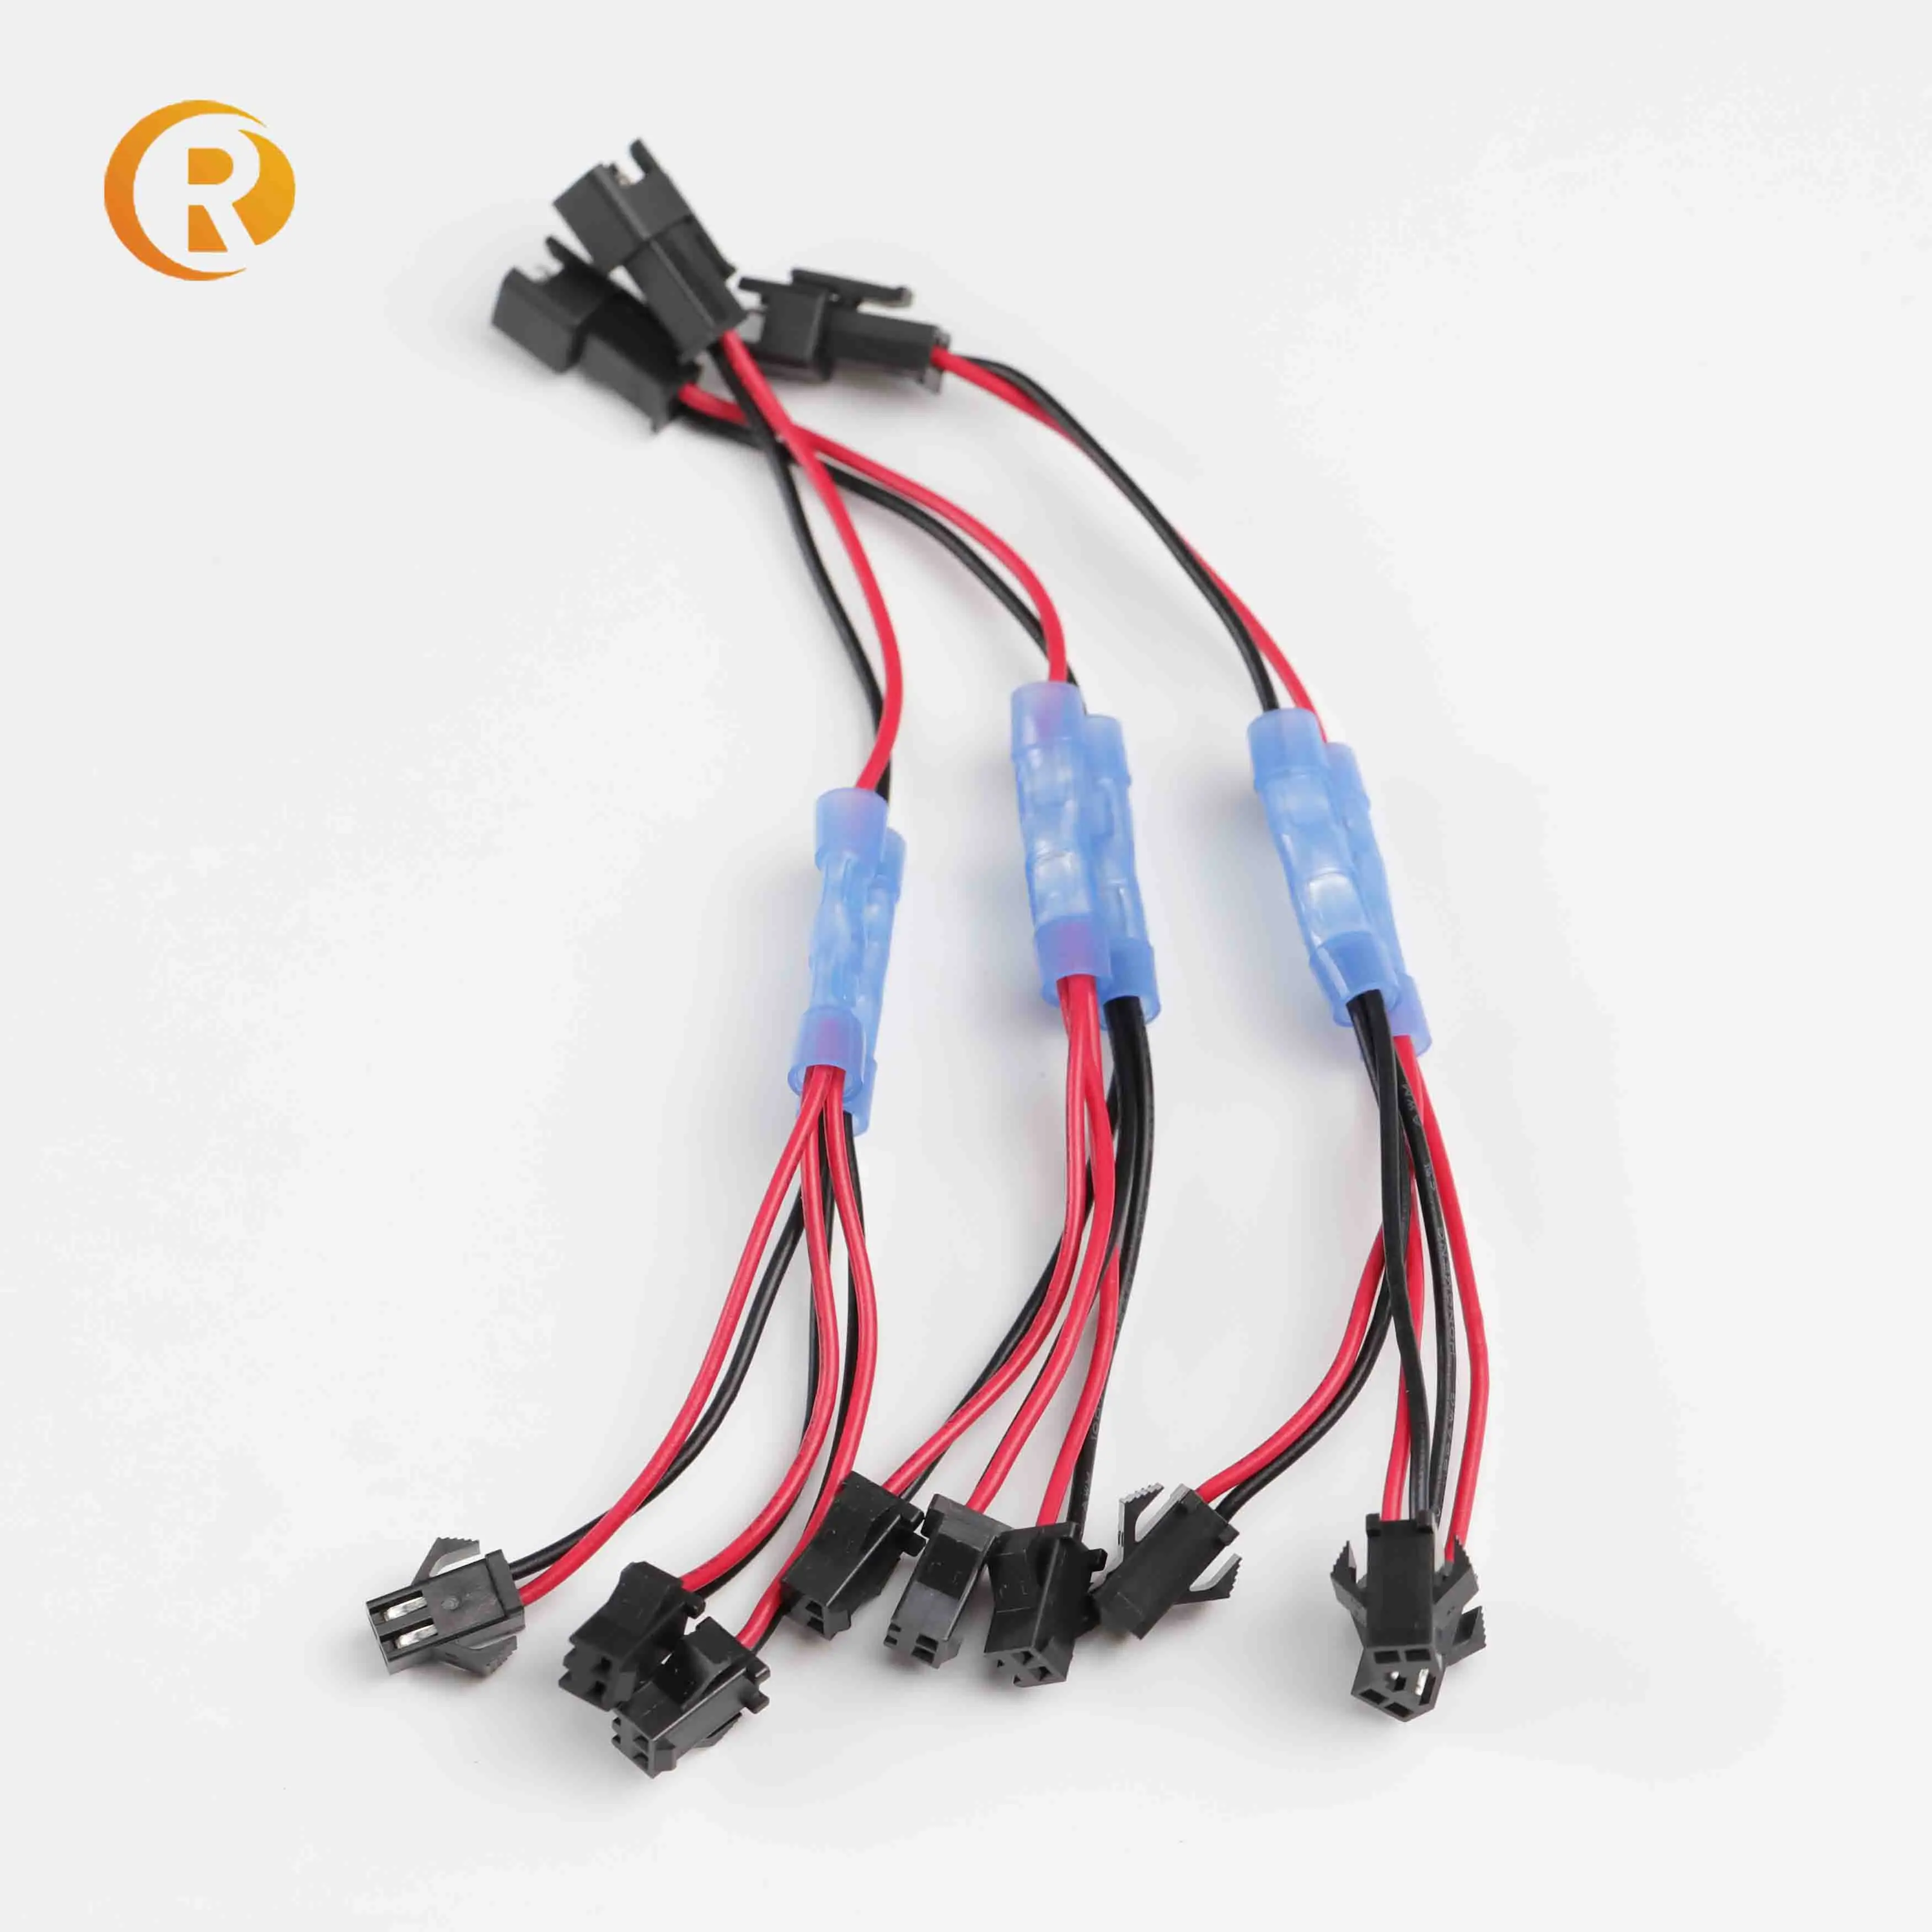 
1.0 1.5 1.25 2.0 2. 5 3.96mm pitch Jst Molex TE Tyco Amp Connector custom wire harness 